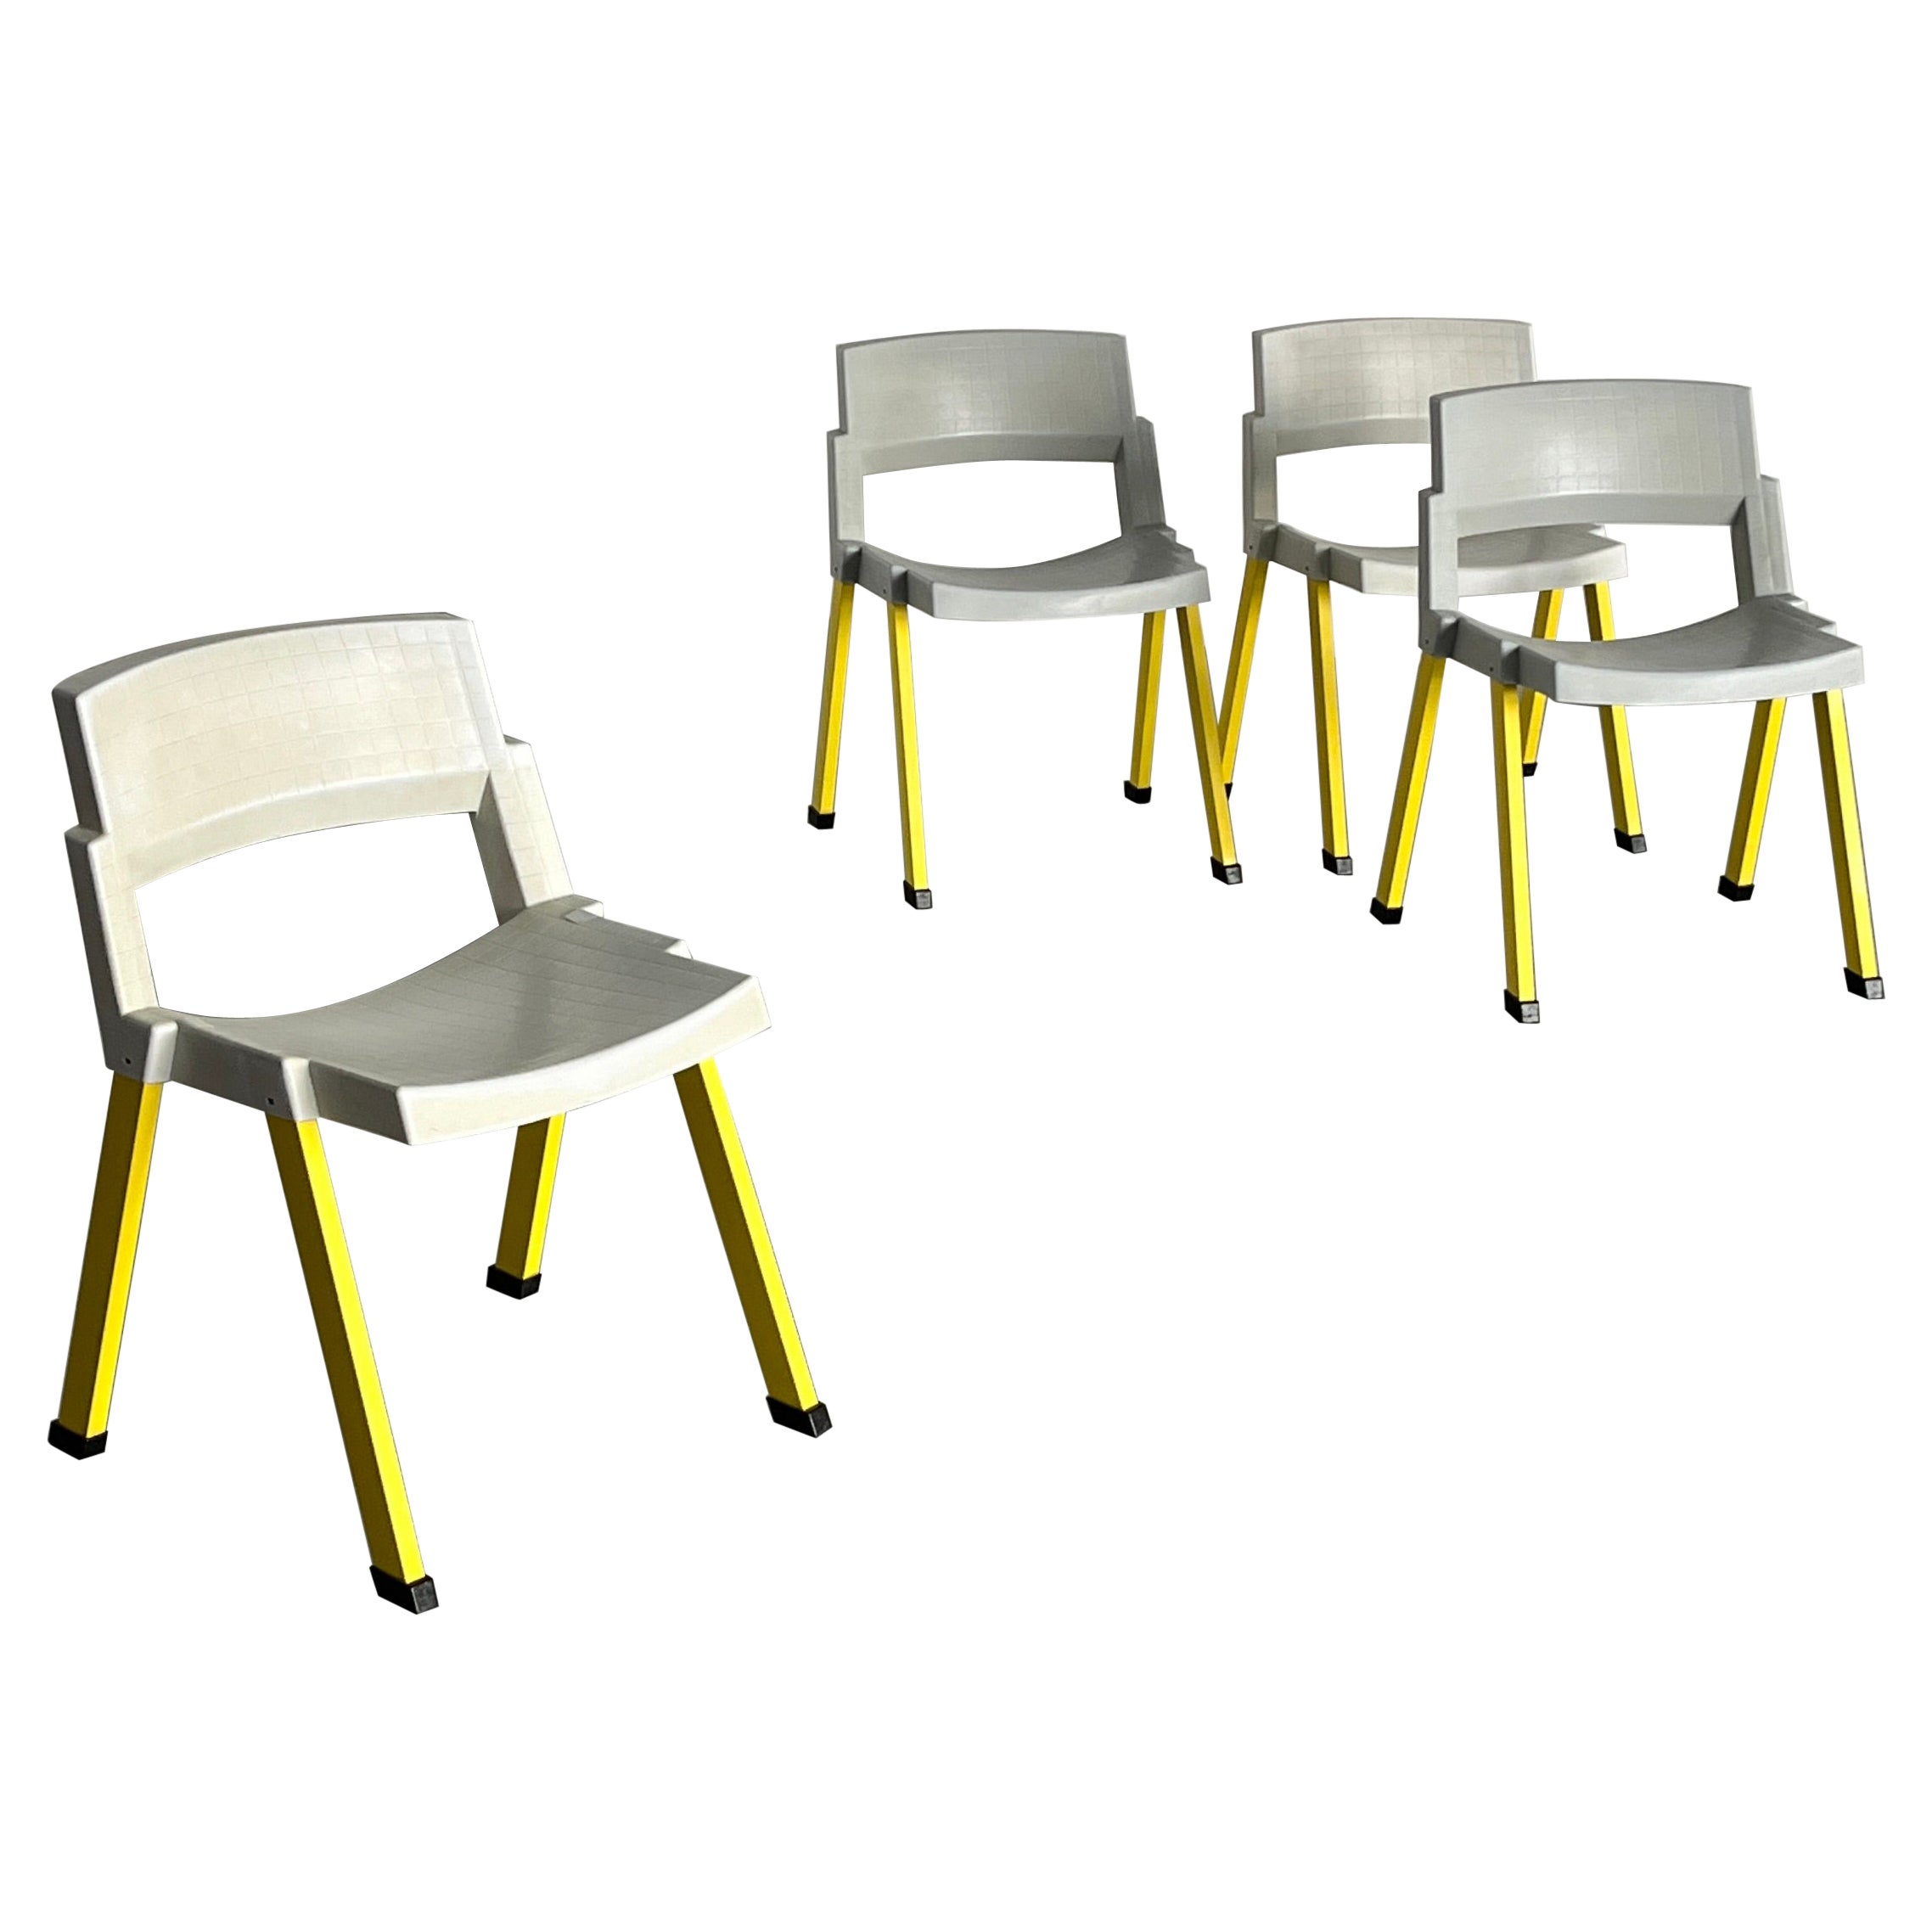 Set of 4 Postmodern 'City' Chairs by Paolo Orlandini and Roberto Lucci for Lamm